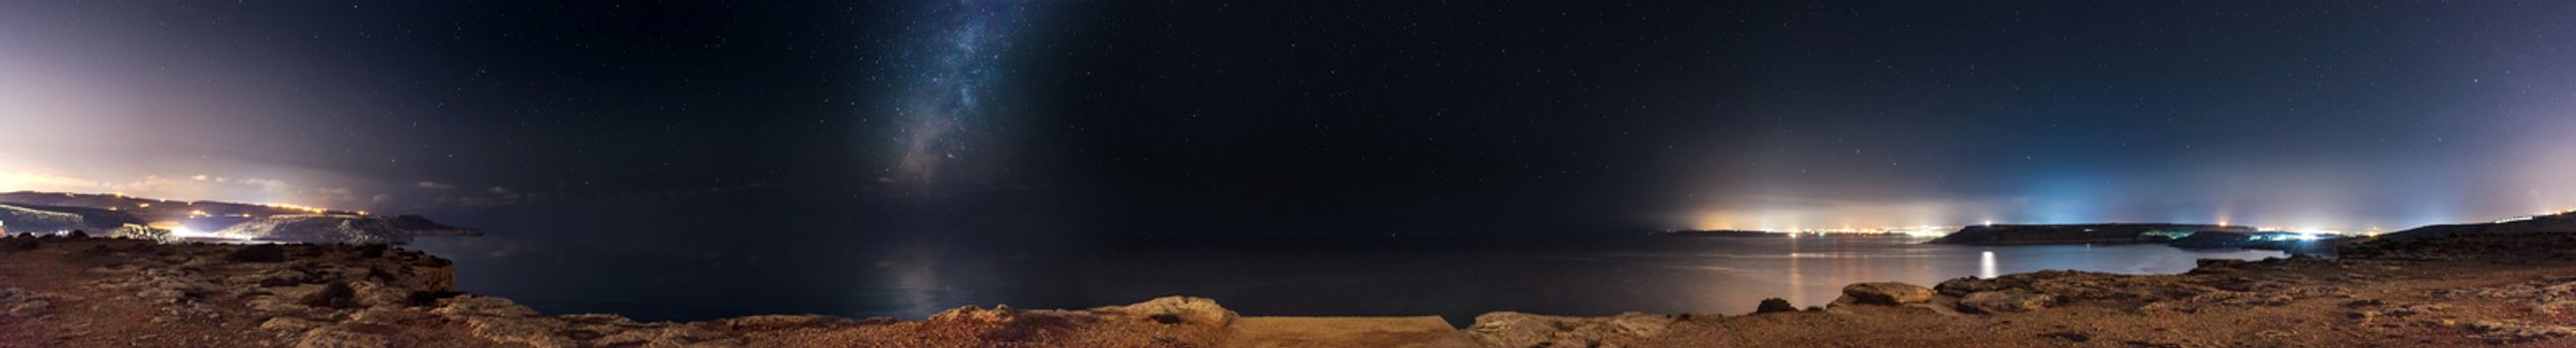 A full 180 degree panorama of the night sky view as seen from Majjistral Park in Malta